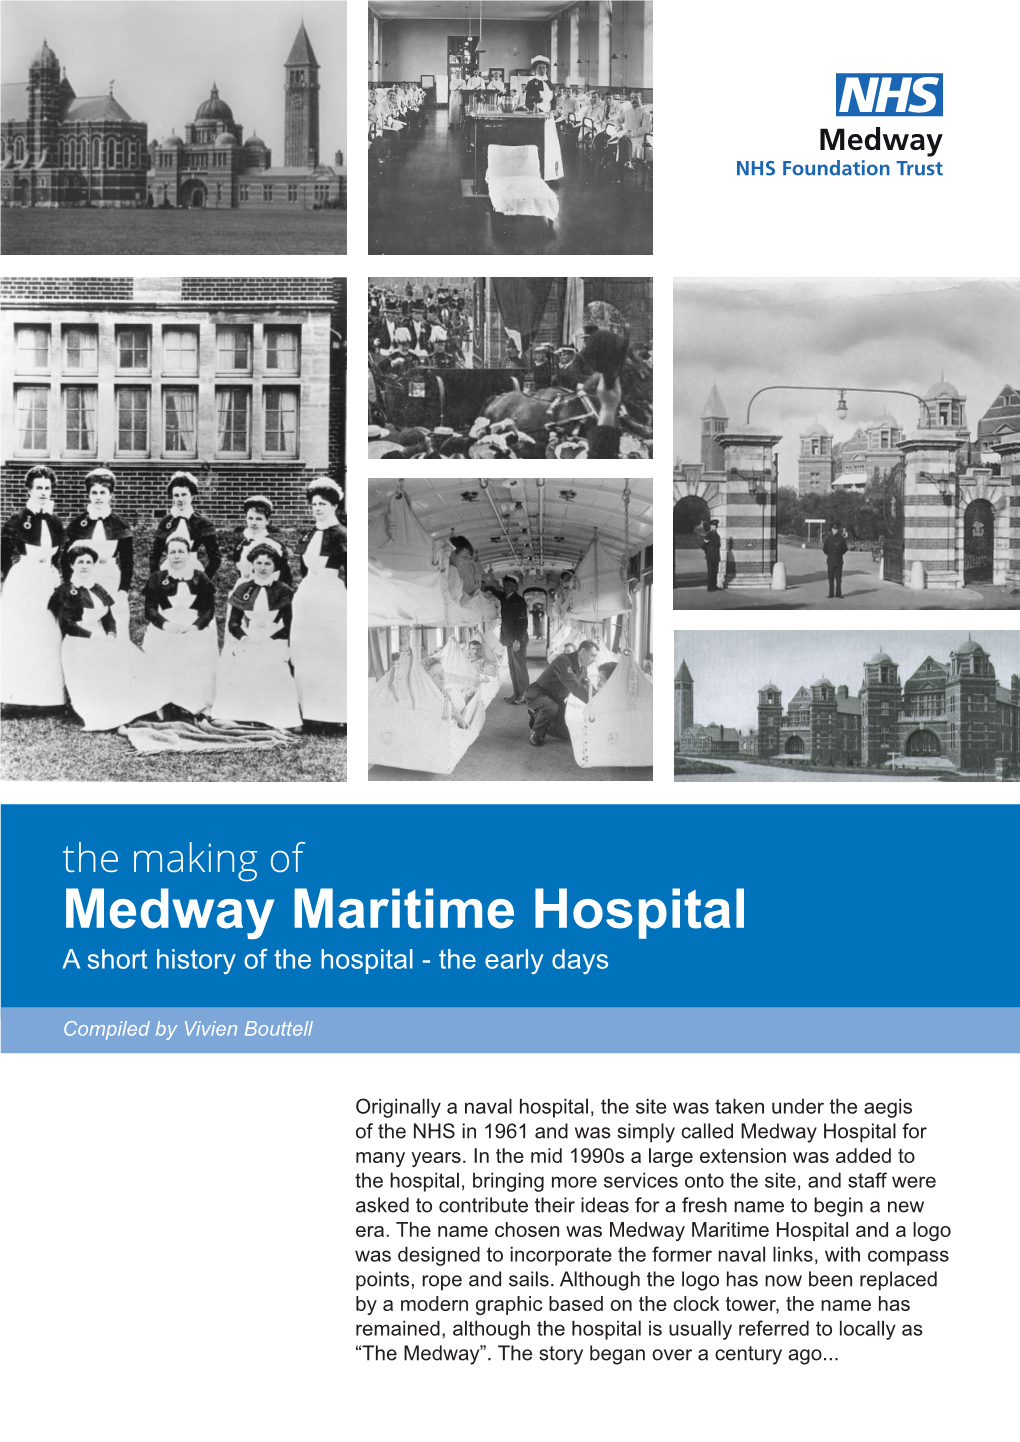 The Making of Medway Maritime Hospital a Short History of the Hospital - the Early Days